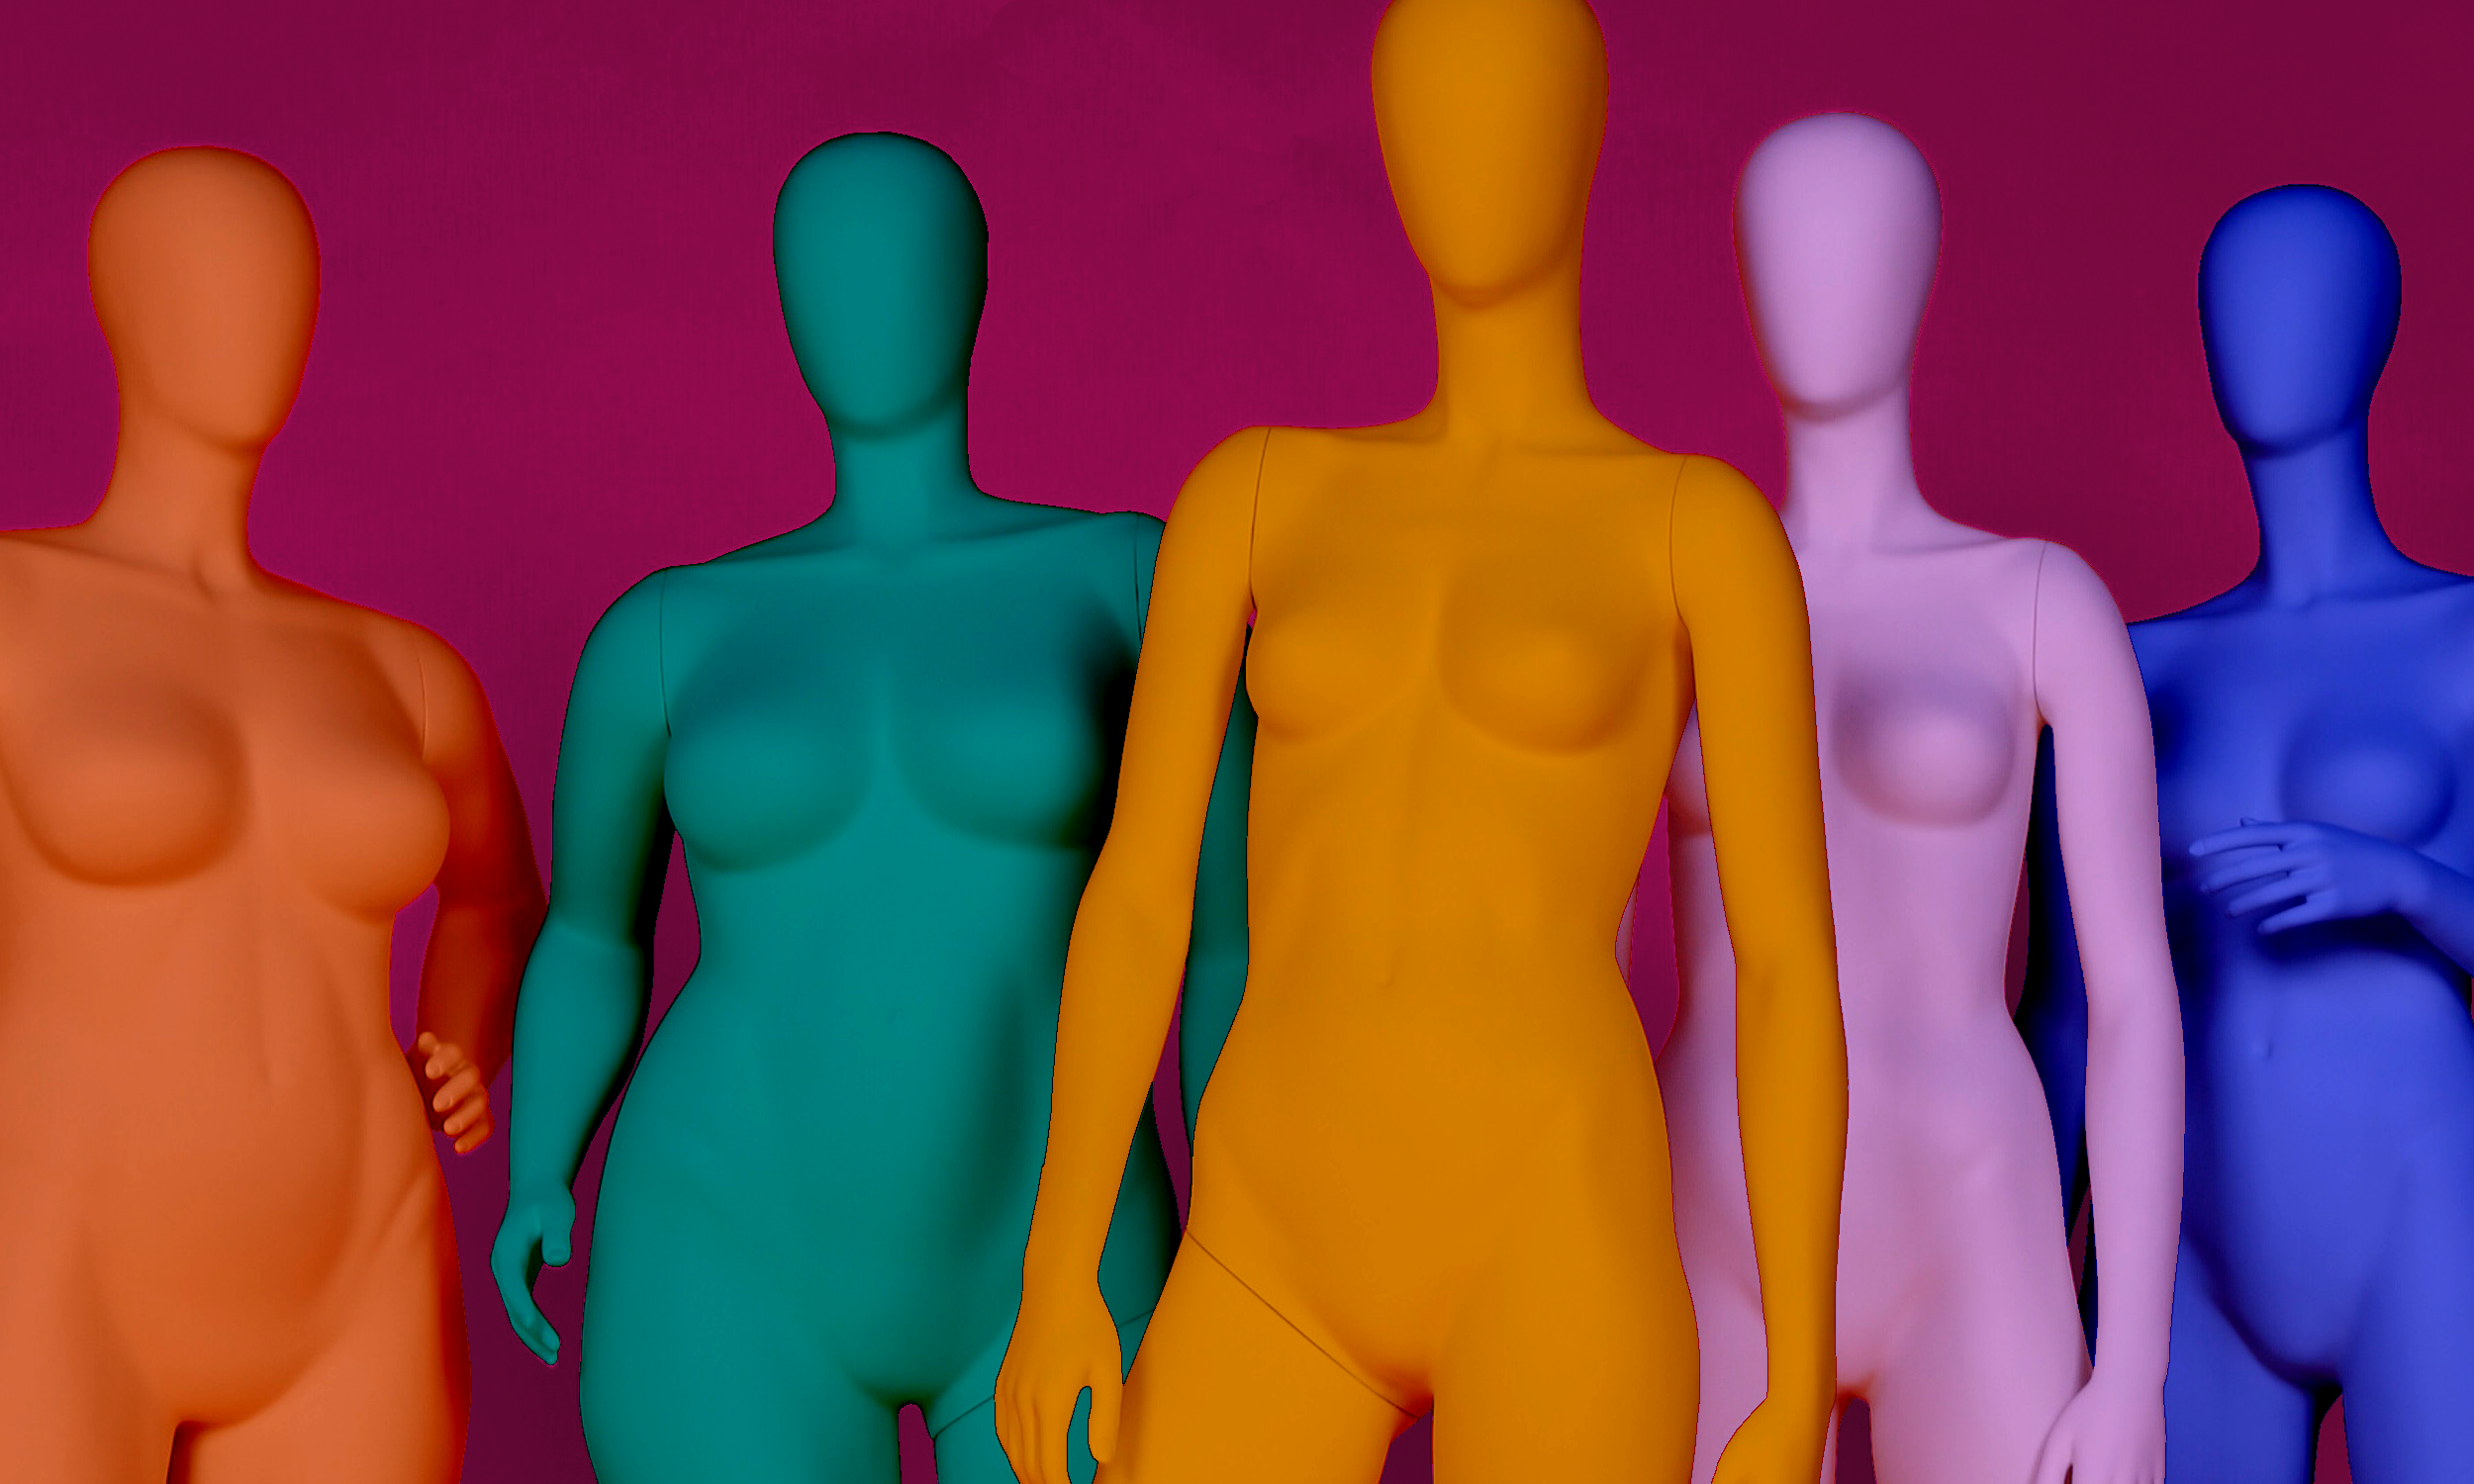 Five mannequins posing. Fusion Community collection.